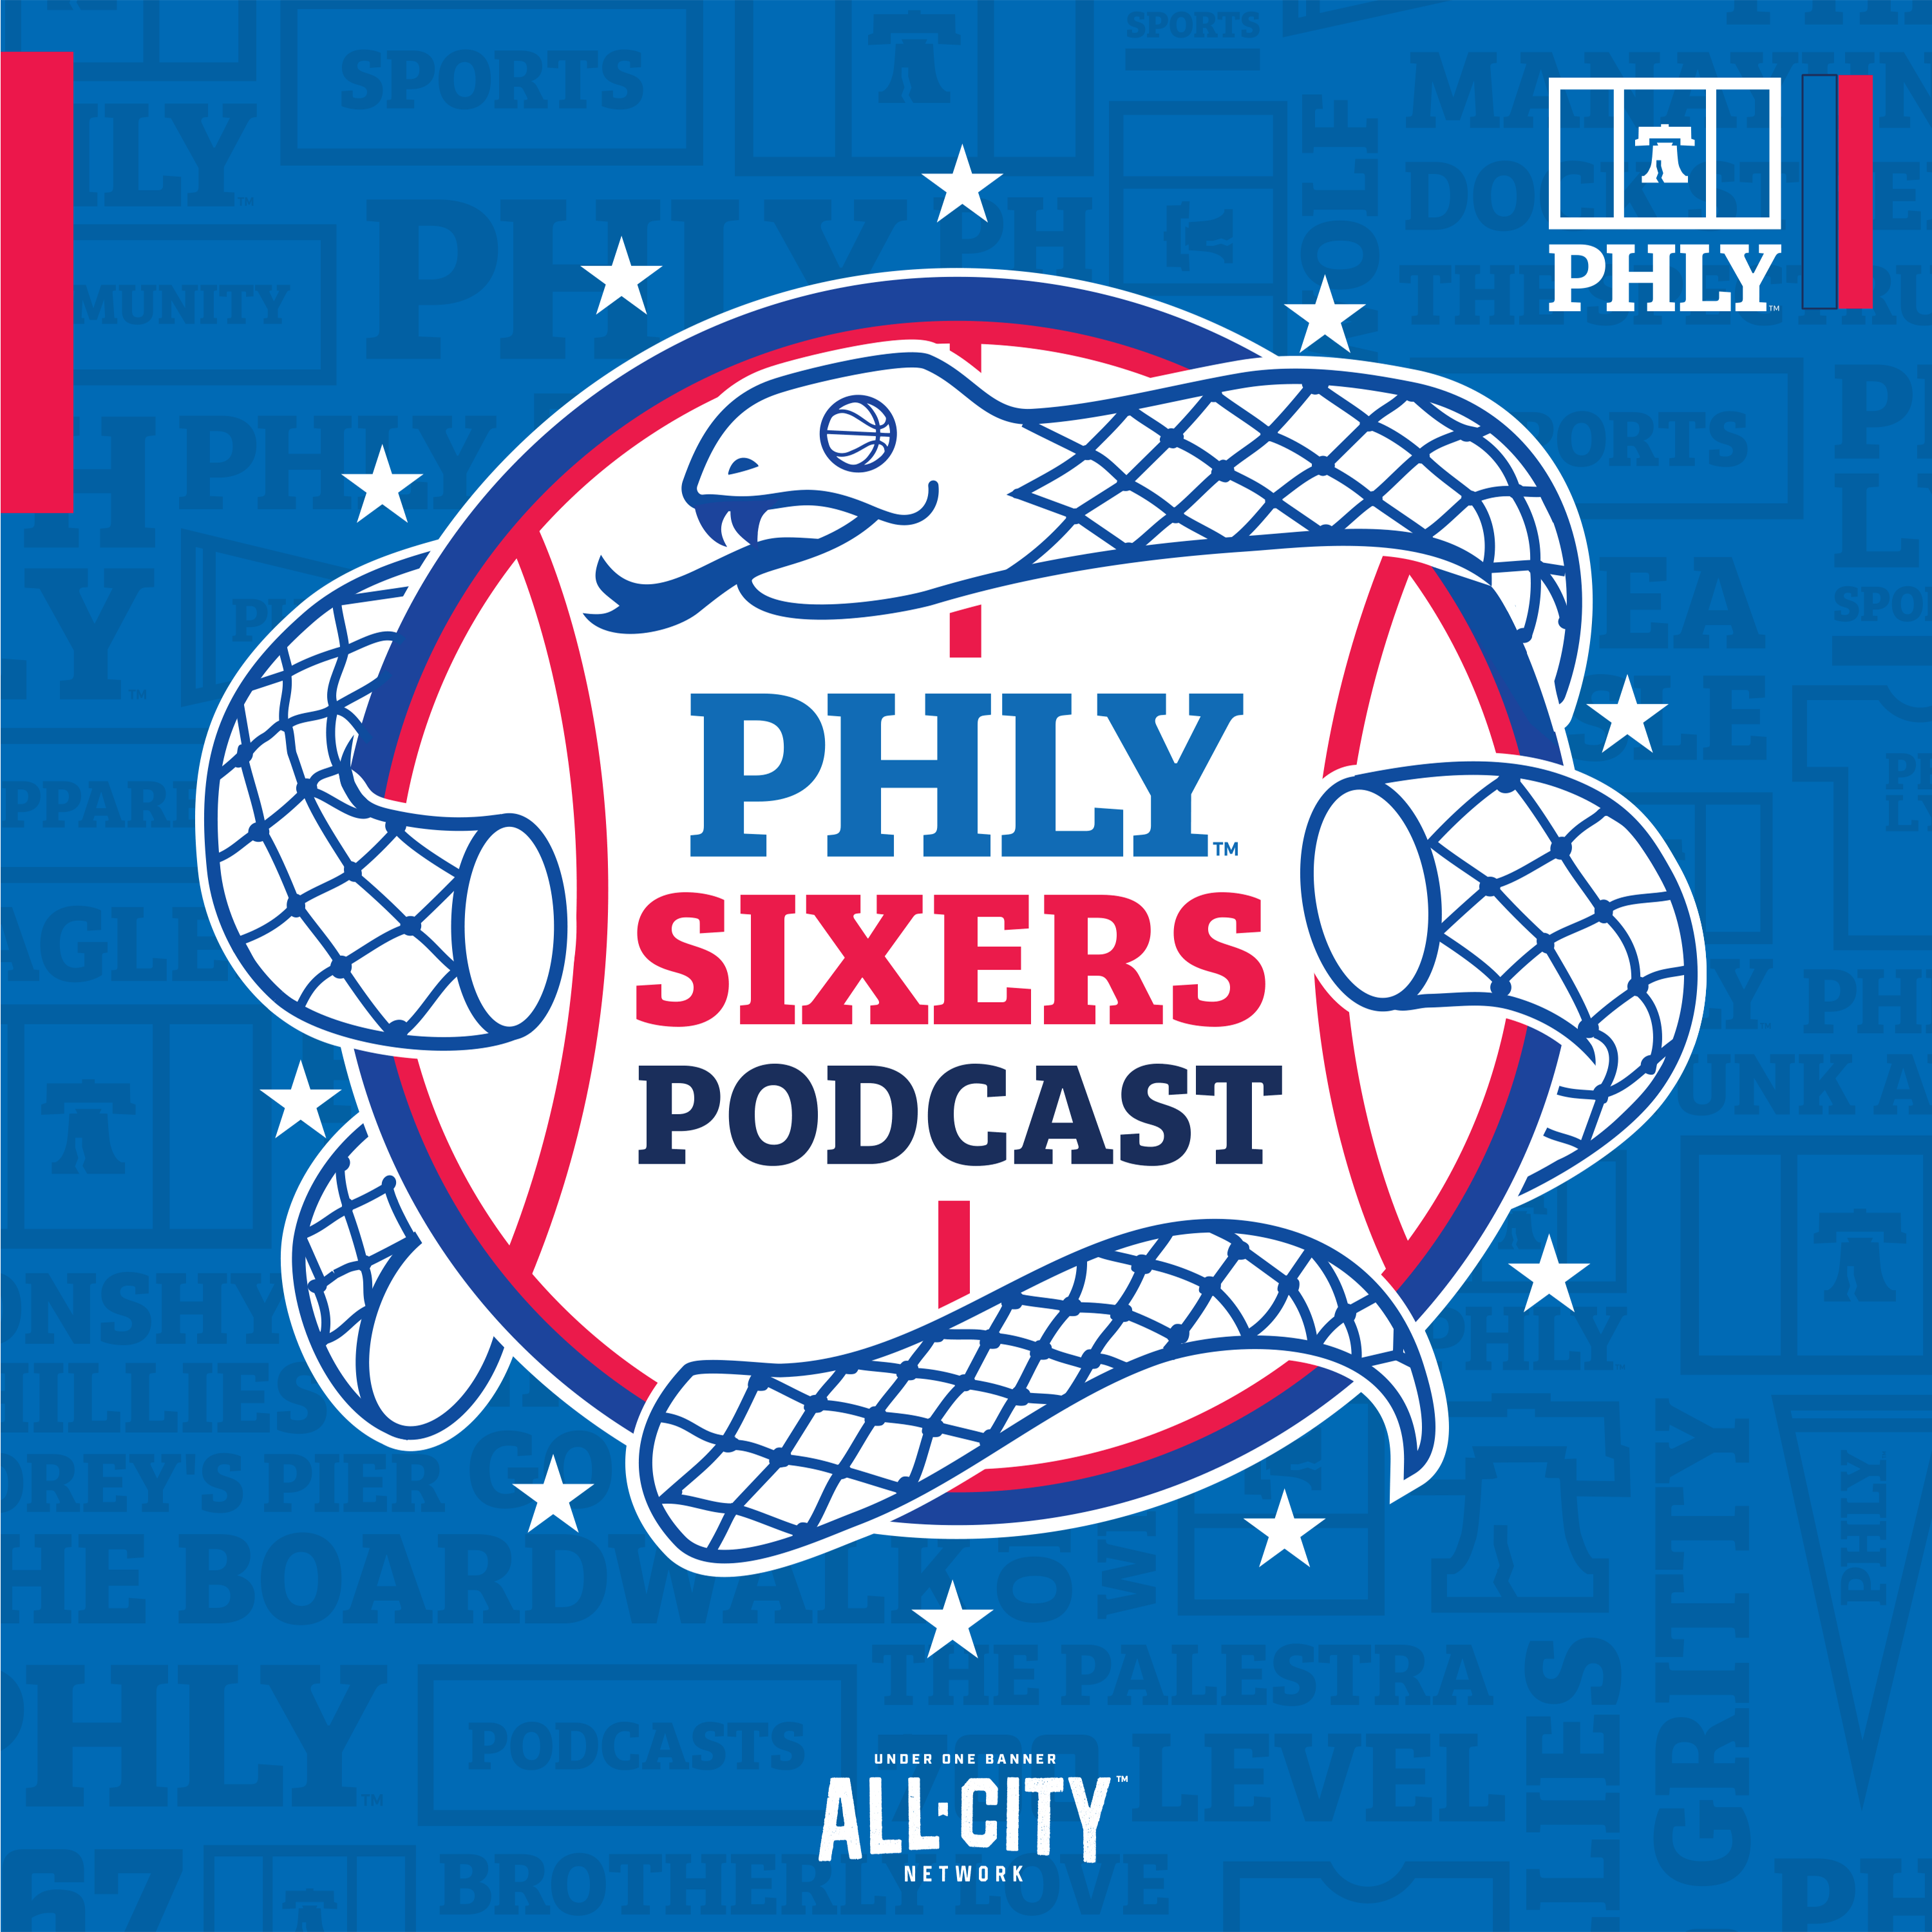 PHLY Sixers Podcast | Are the Sixers a real threat to sign Paul George or just leverage?